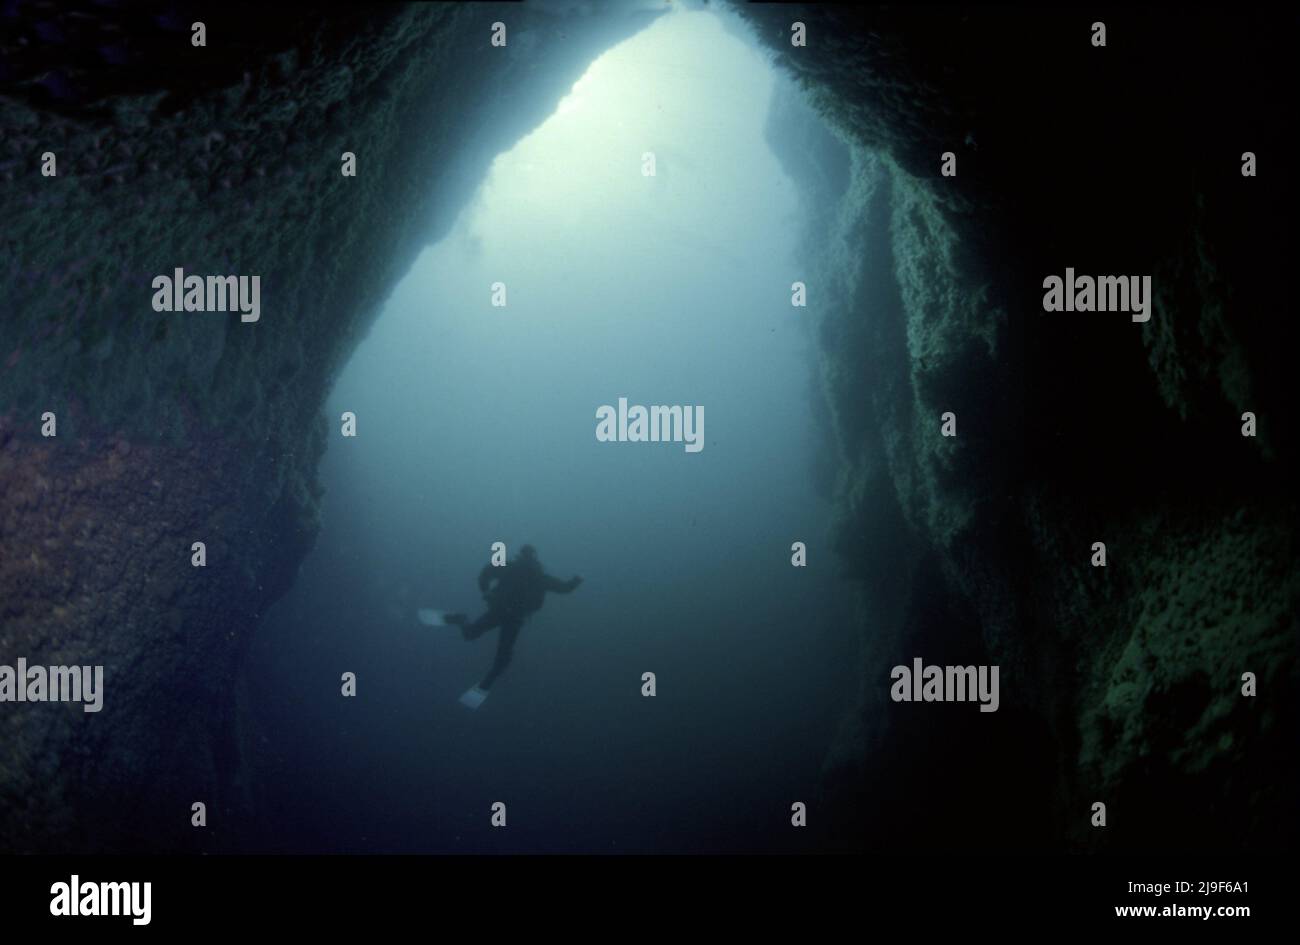 Sgarbhstat  Arch, Diver gives scale to the picture 40m below the surface, 30m through the arch, 20 m wide, and 50 m to the bottom Boreray, St Kilda UK. 1987 Stock Photo